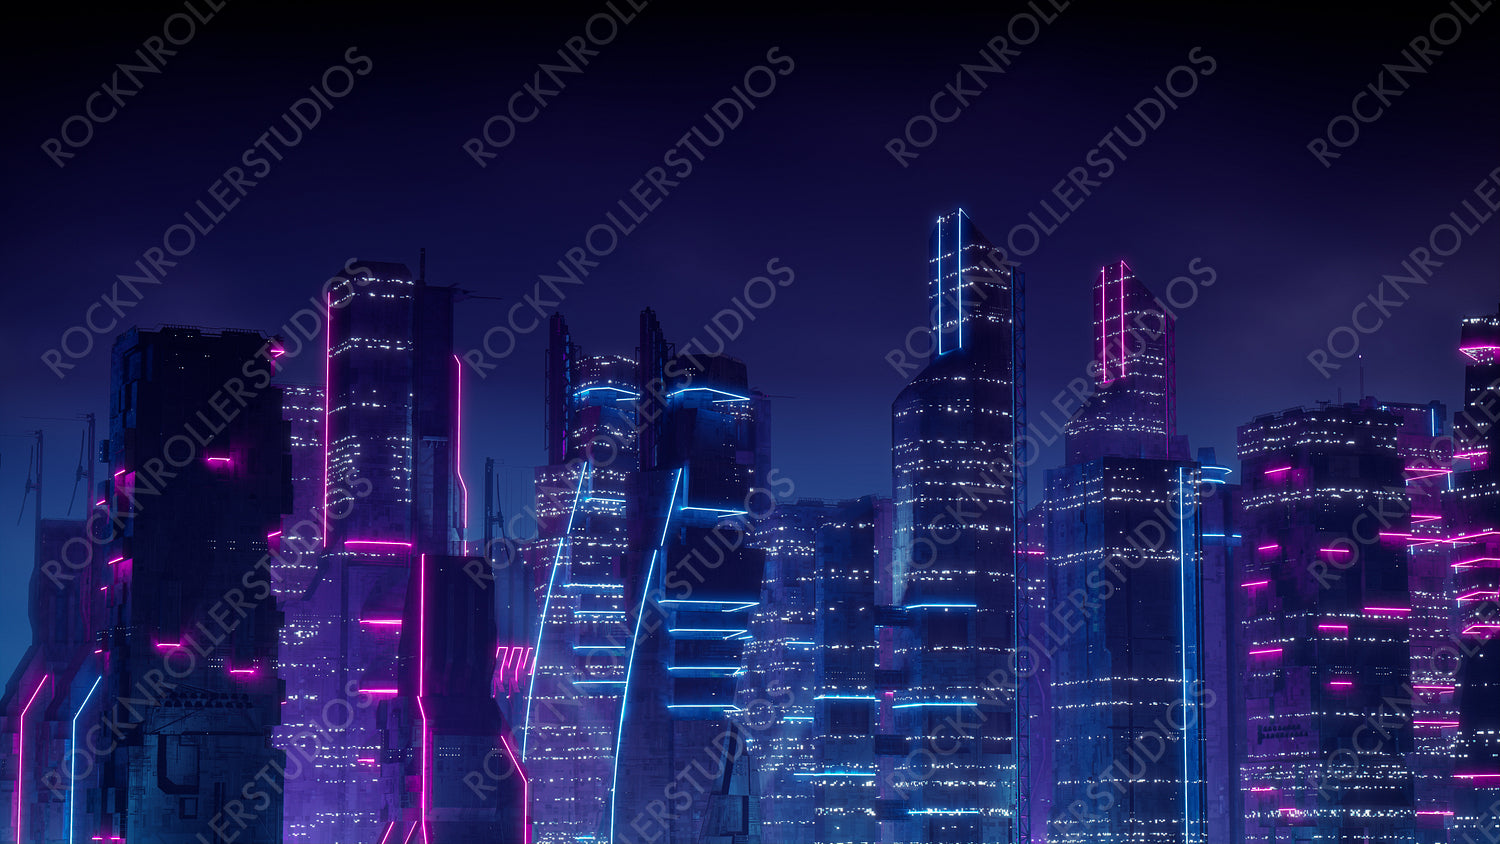 Cyberpunk City Skyline with Blue and Pink Neon lights. Night scene with Futuristic Superstructures.